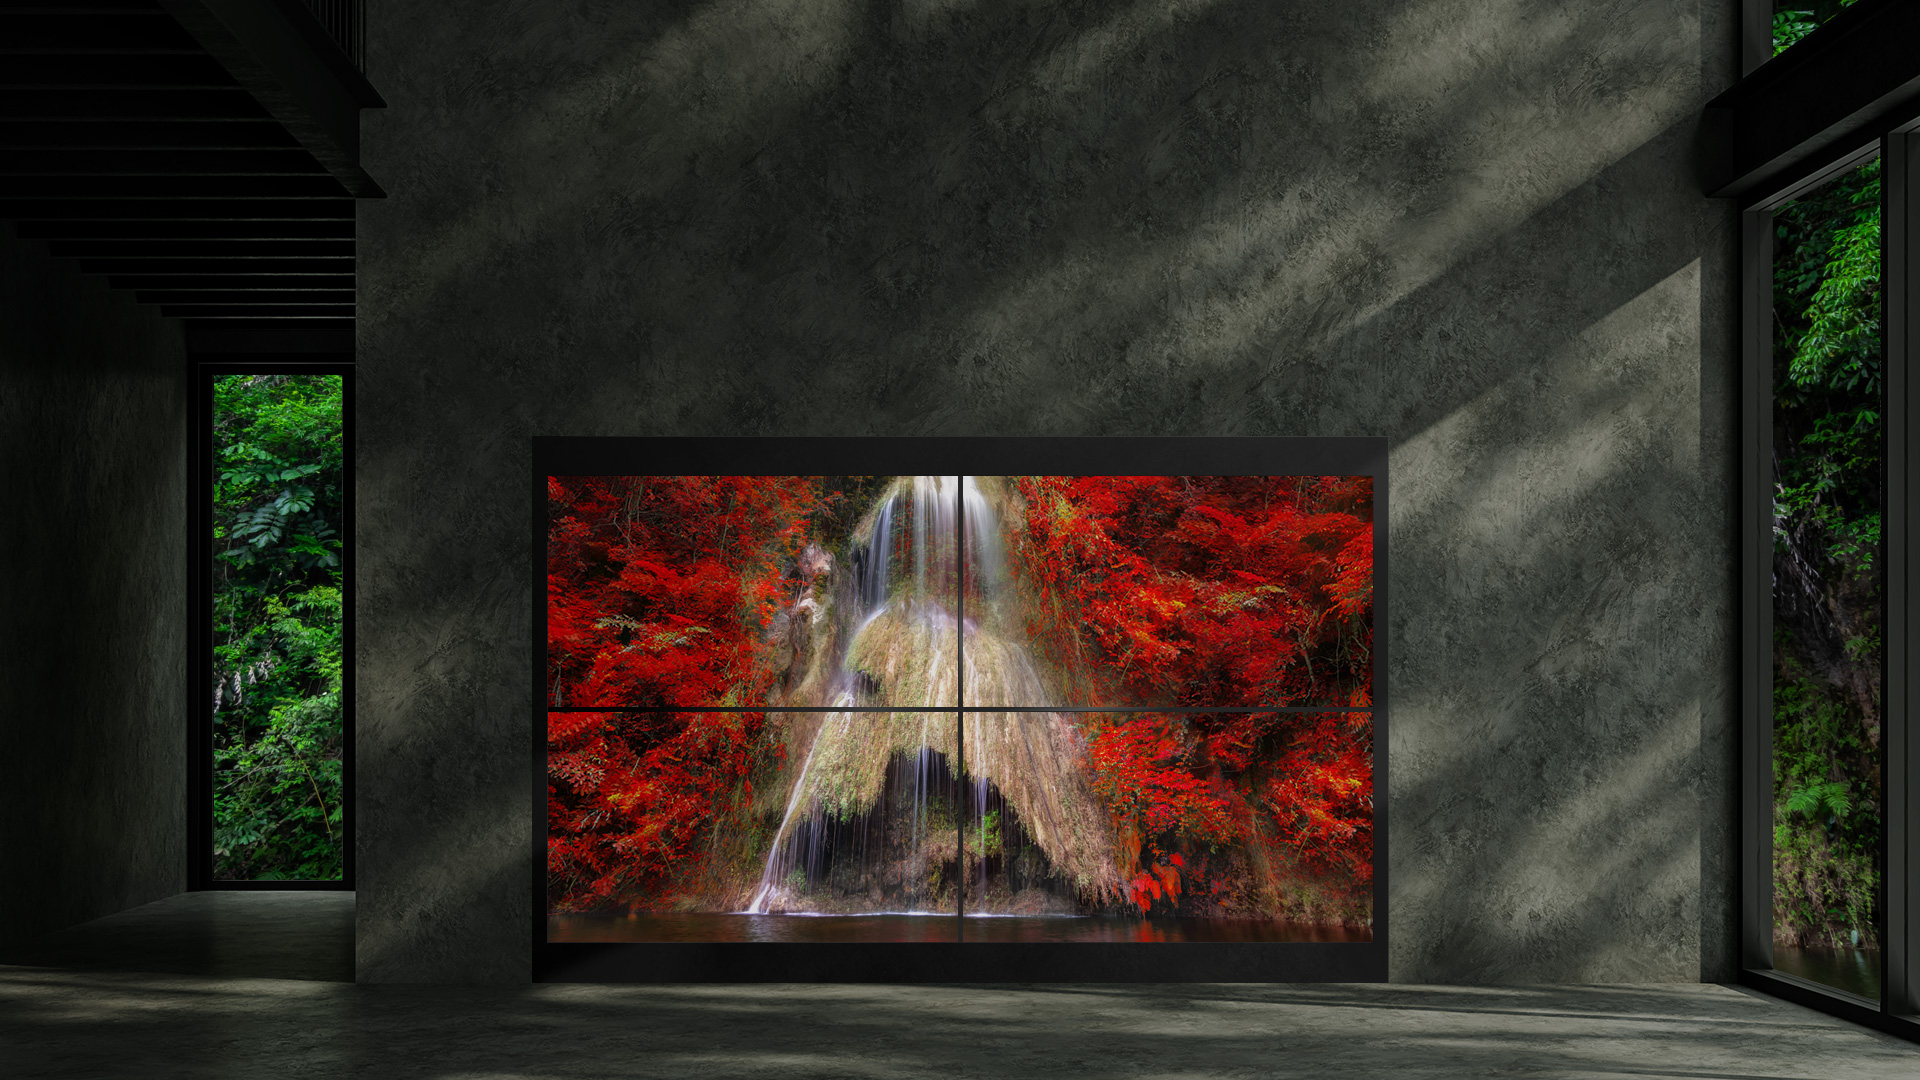 Single Transparent OLED signage displaying an imagery of mountain tree leaves turning into red with the view of the waterfall in the middle.